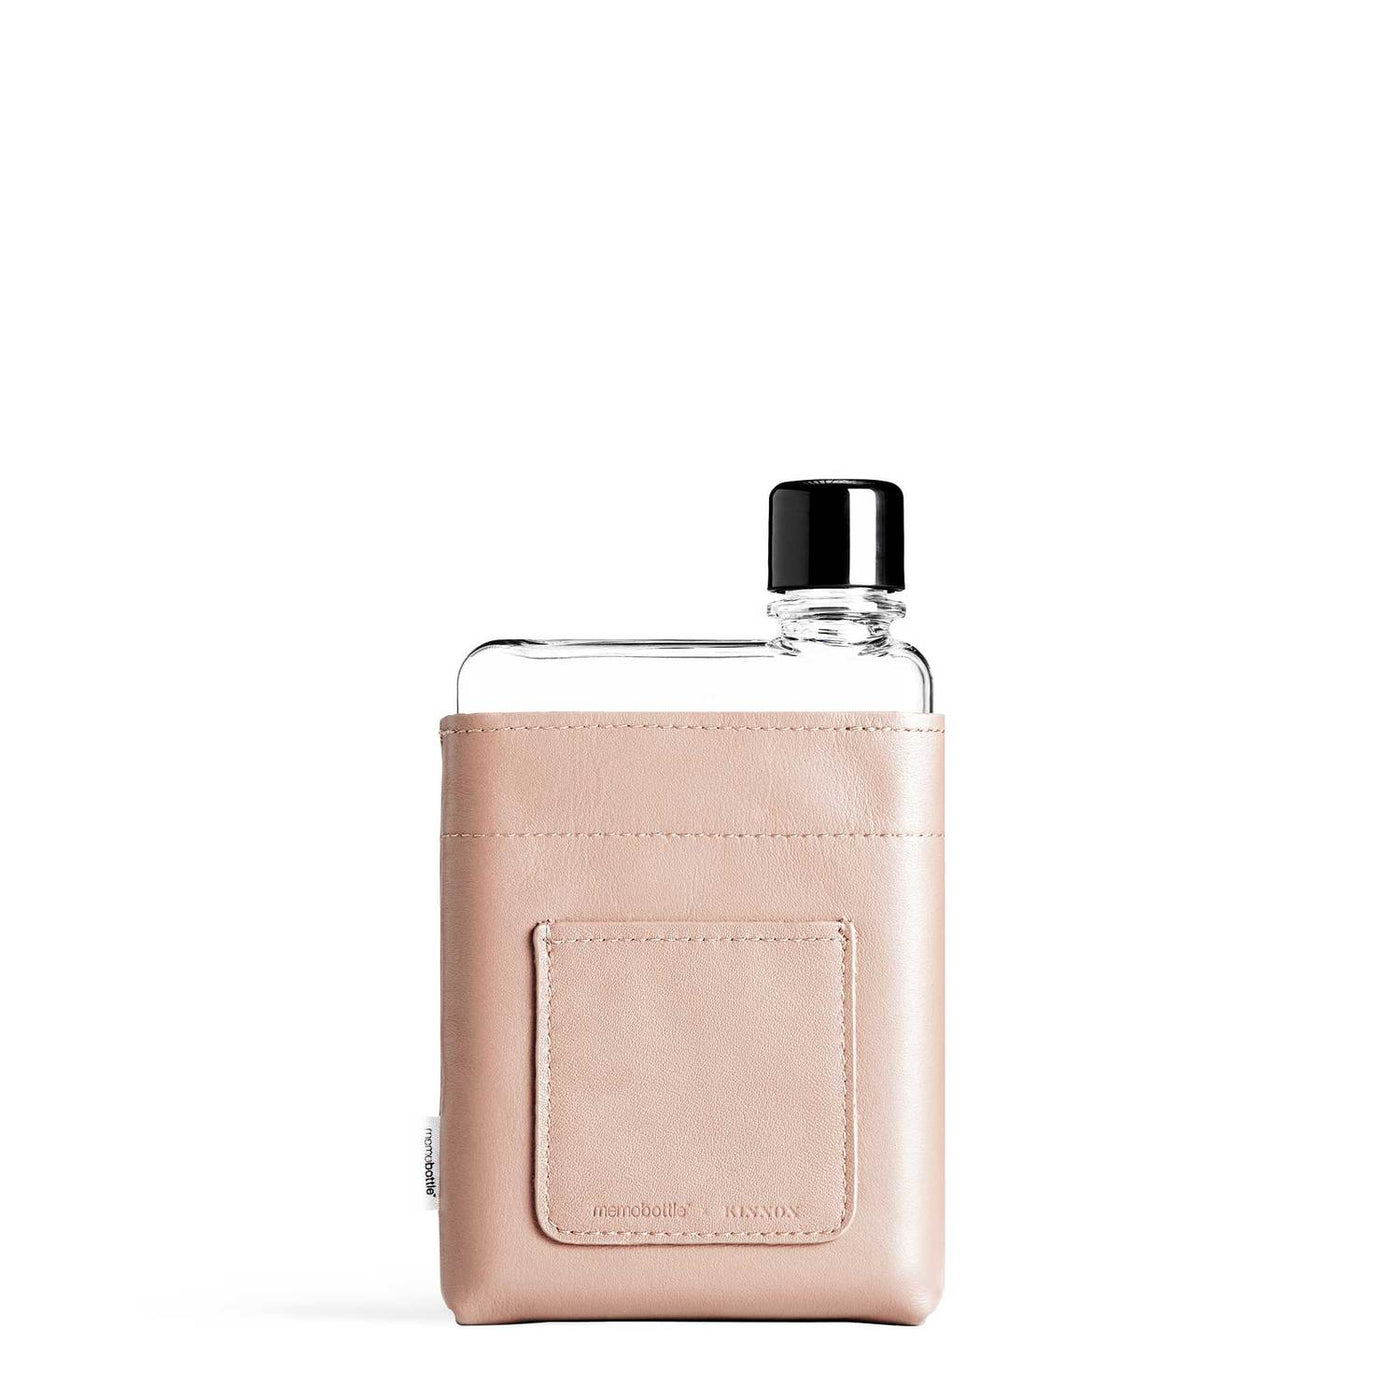 A6 Memobottle Leather Sleeve